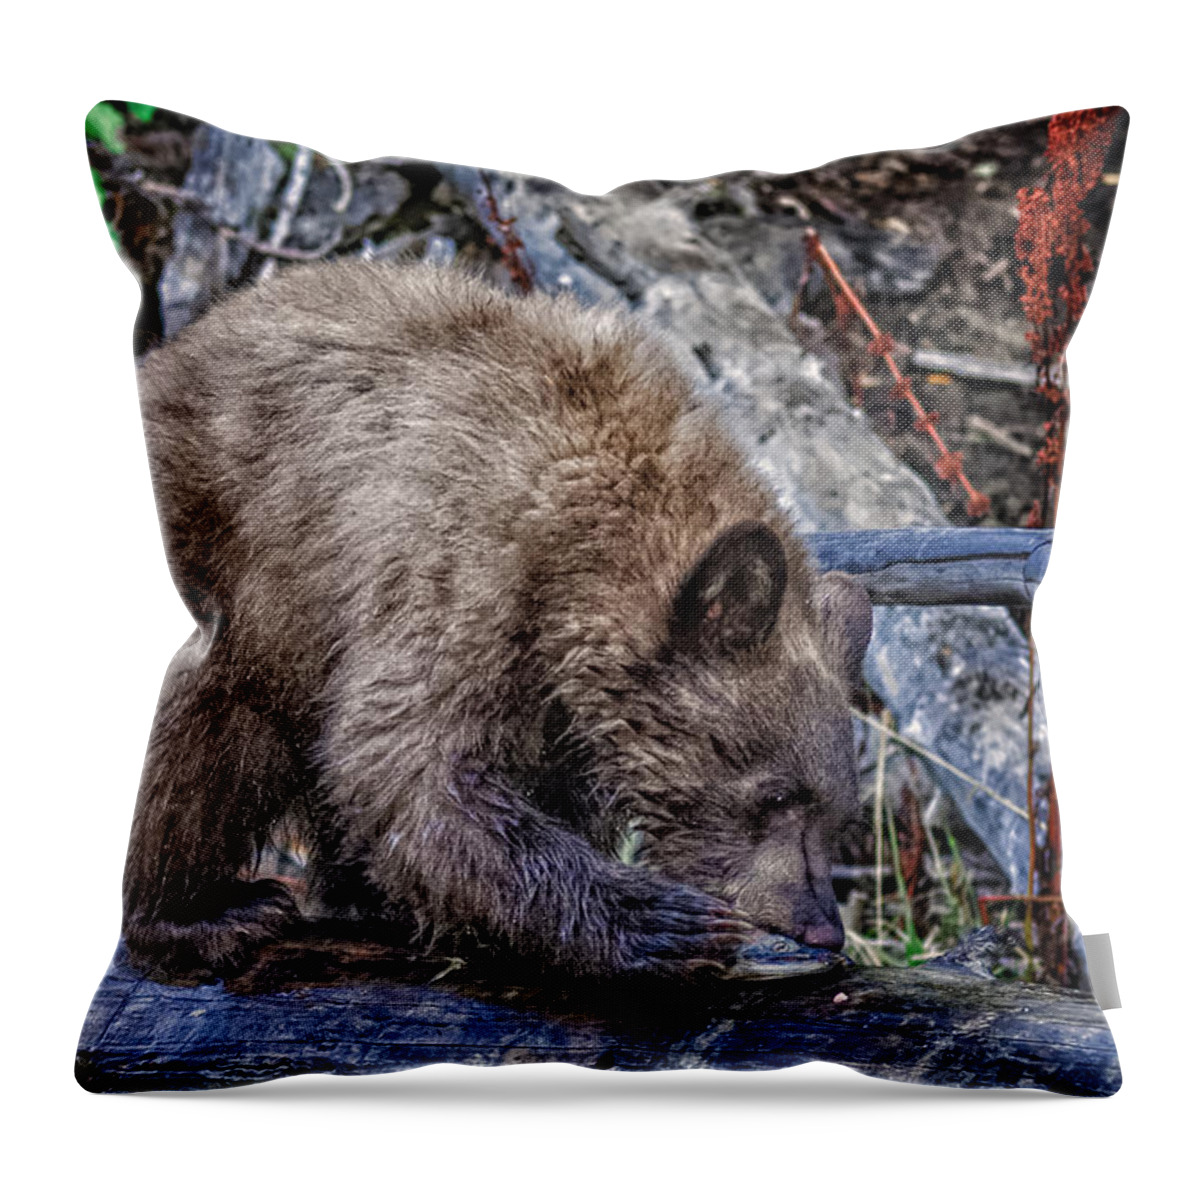 Wildlife Throw Pillow featuring the photograph Lunch Break by Jim Thompson